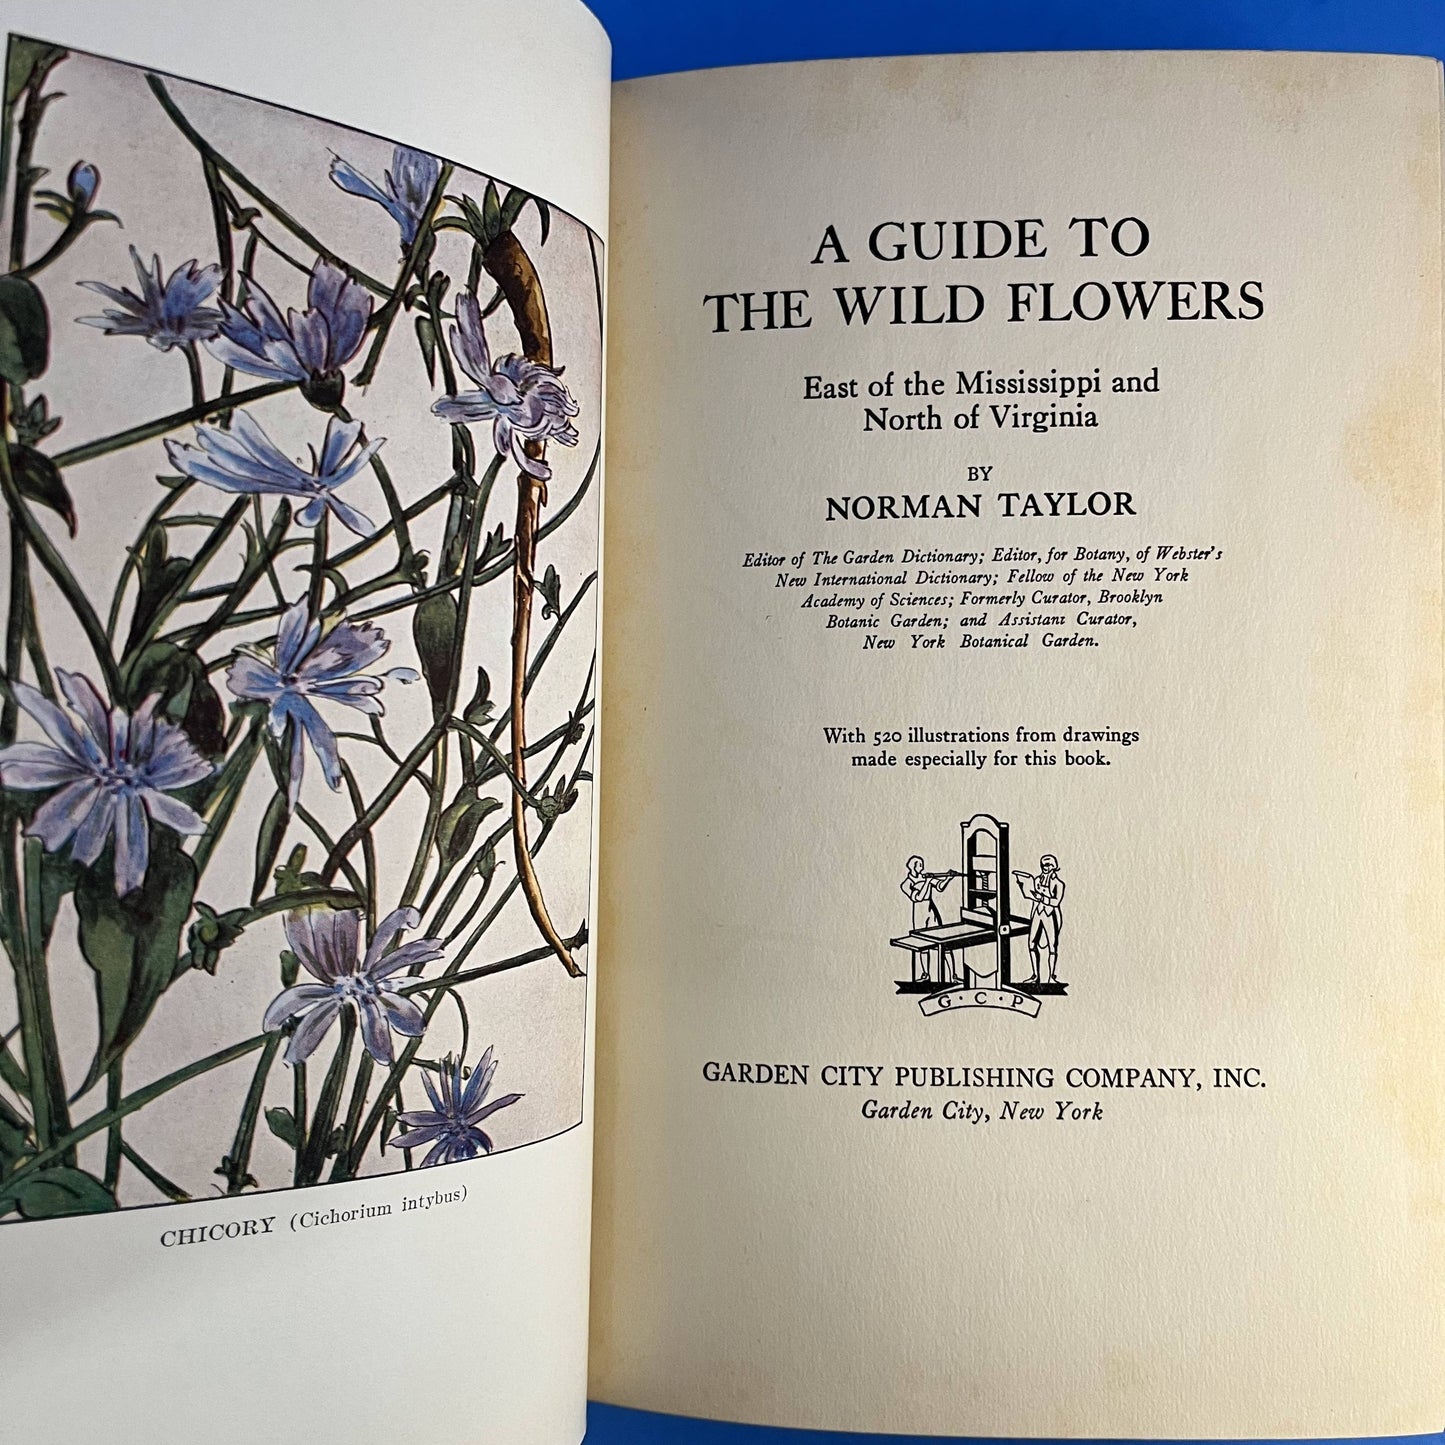 A Guide to the Wild Flowers: East of the Mississippi and North of Virginia